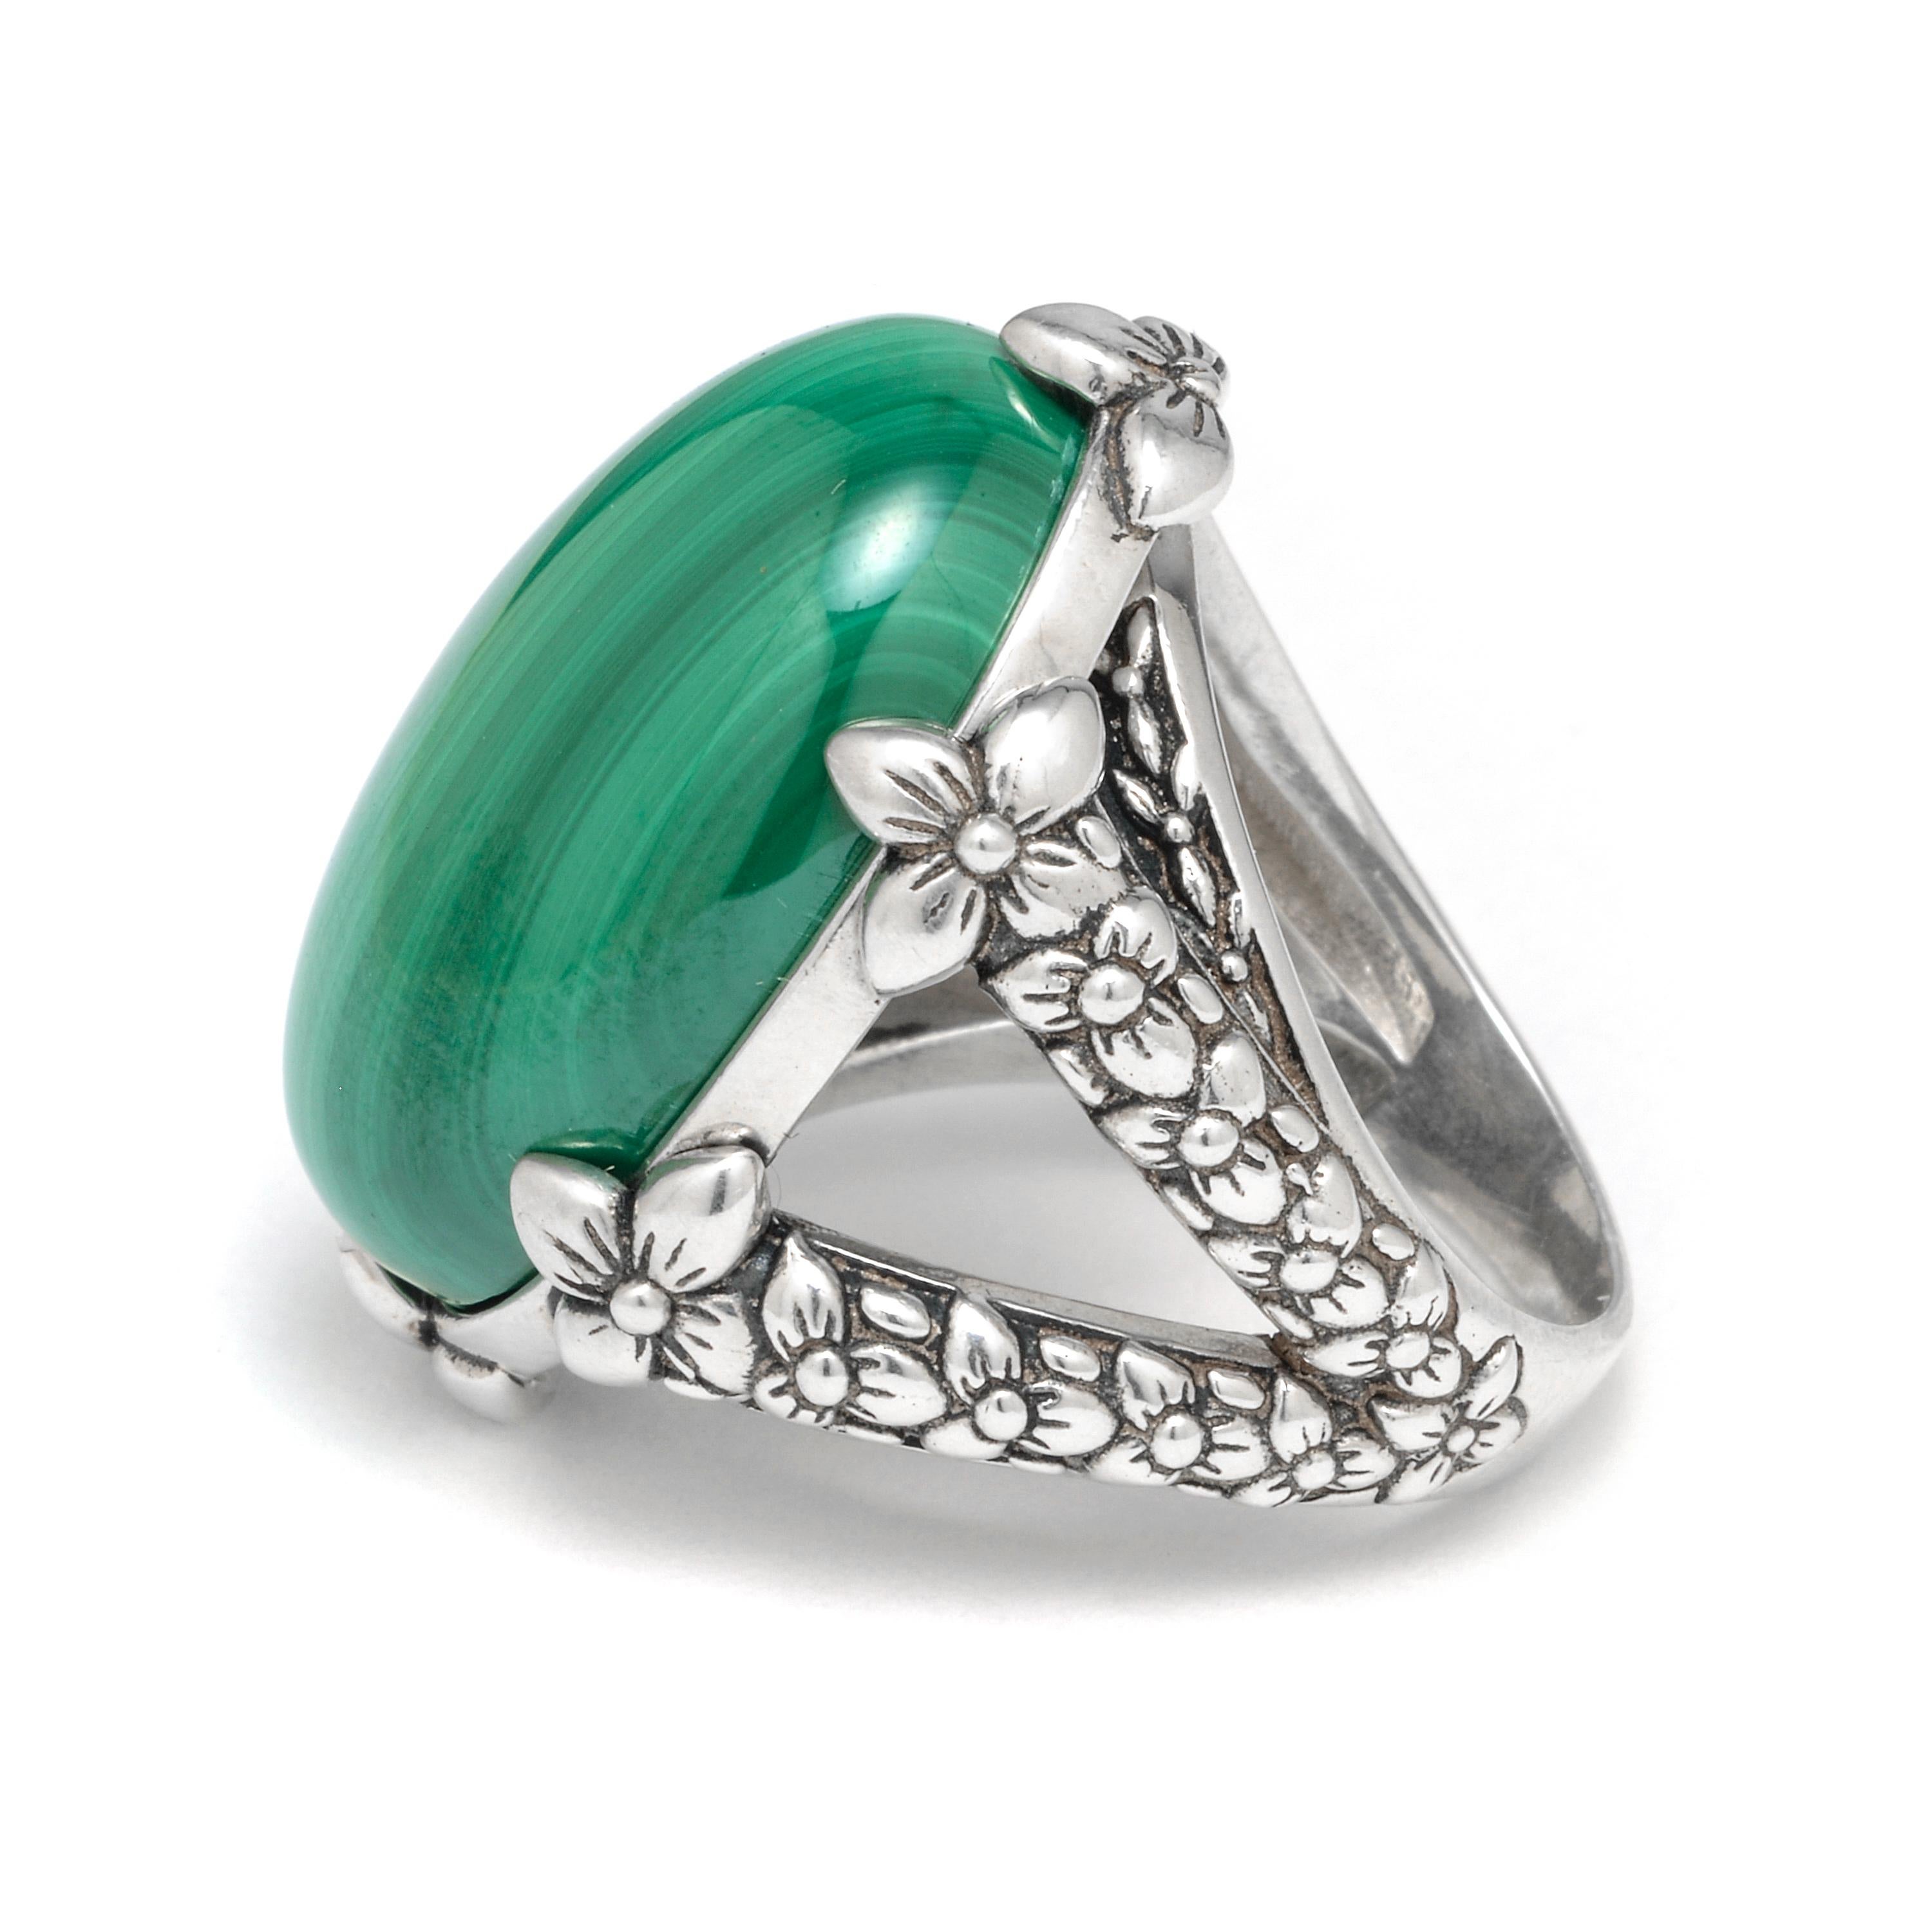 This bold Stephen Dweck Sterling Silver Statement Ring features a vibrant Malachite cabochon (18mm x 26mm) held by double shanks of sterling silver adorned with floral detail. Drawing inspiration from a love of nature and passion for art, each